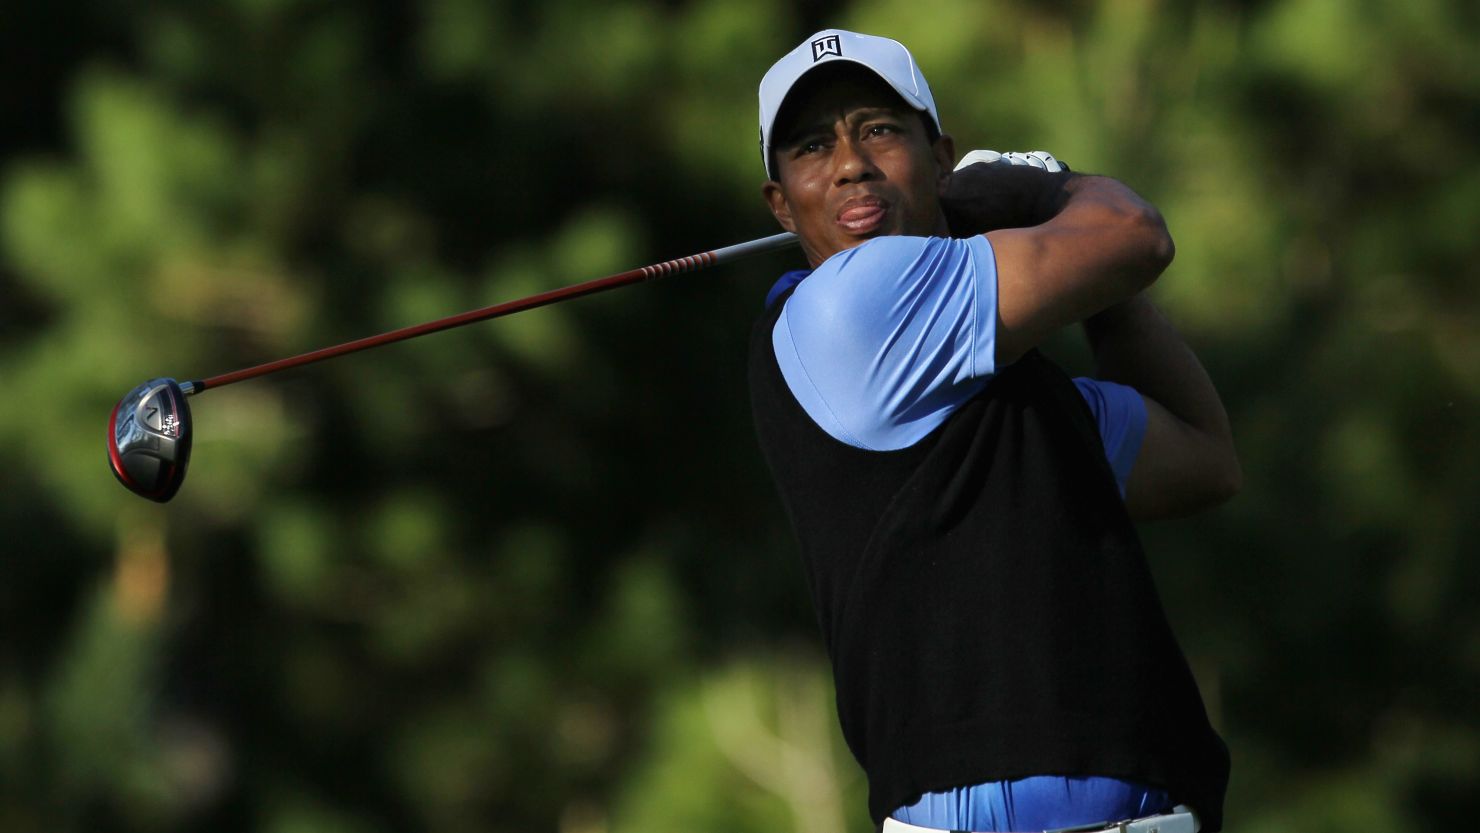 Tiger Woods is seeking his first win in a recognized tour event since November 2009.